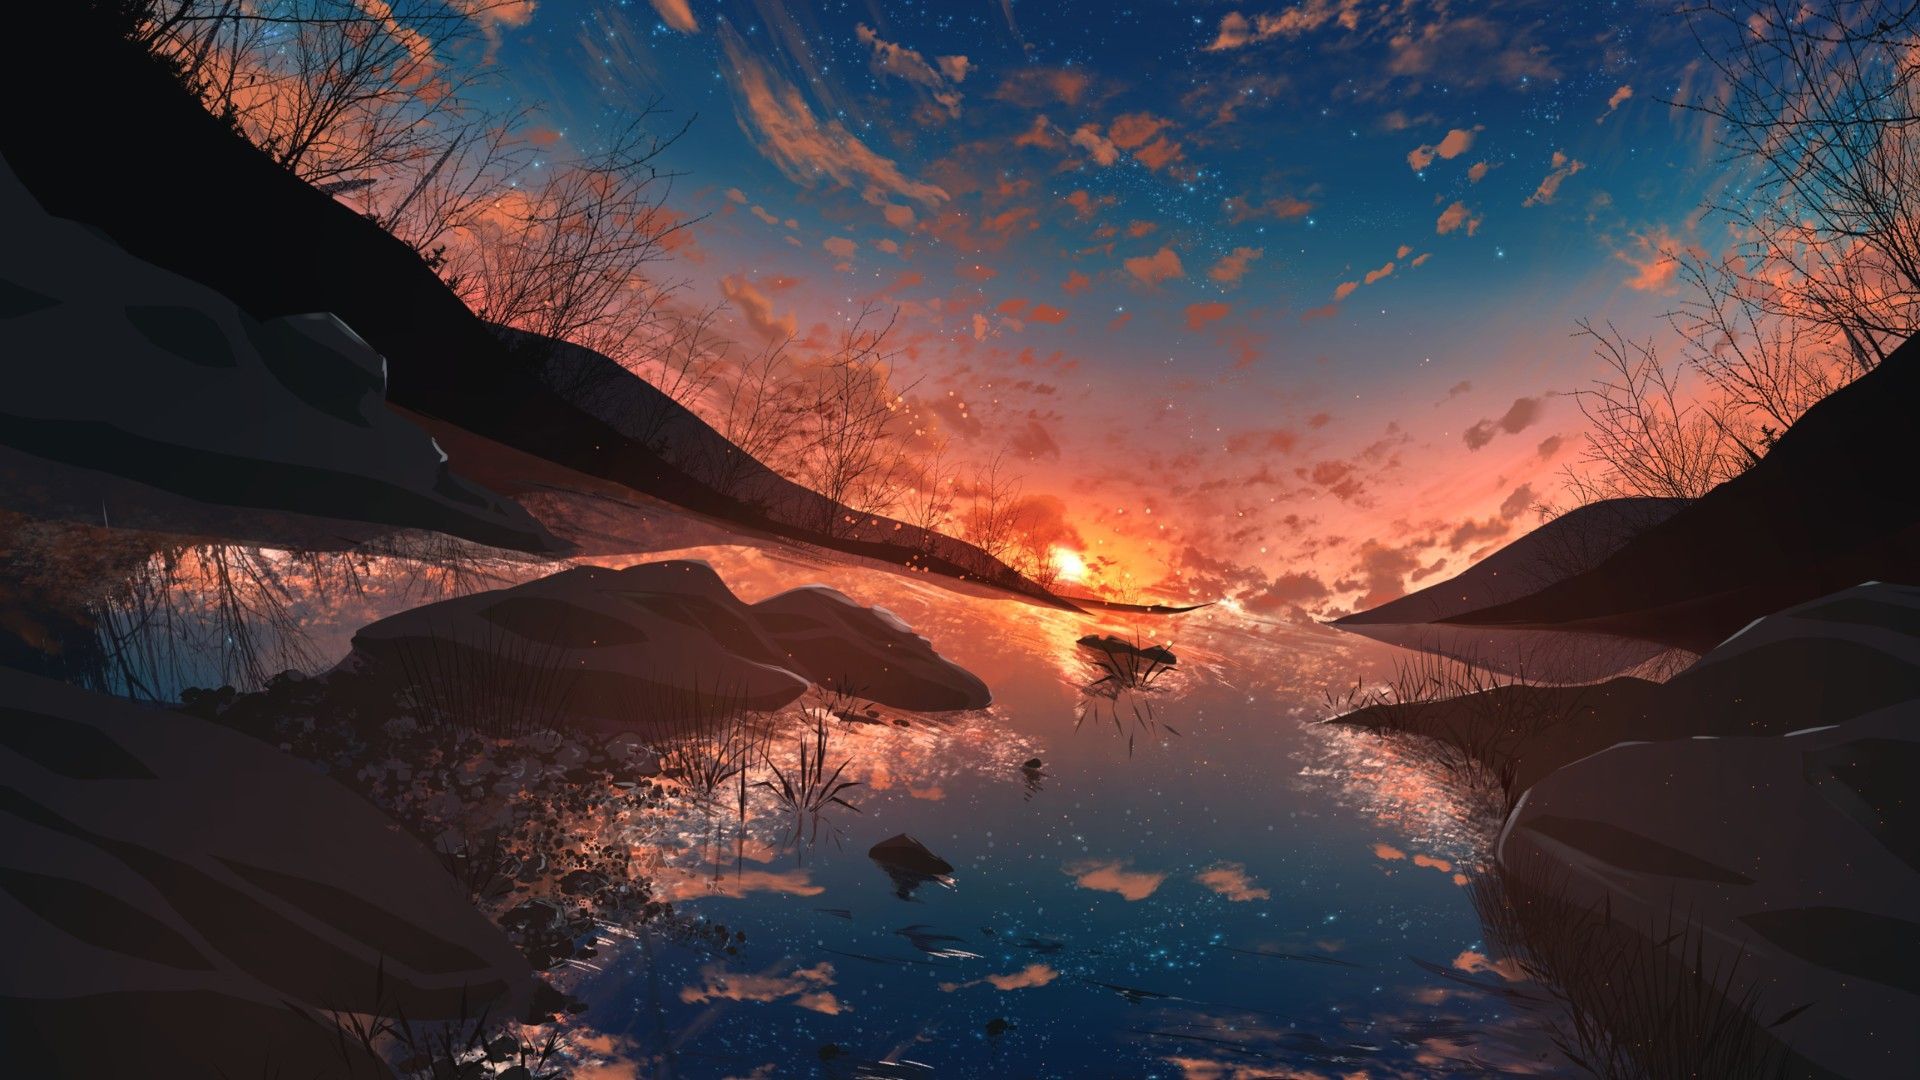 A beautiful sunset painting with a lake and mountains - Laptop